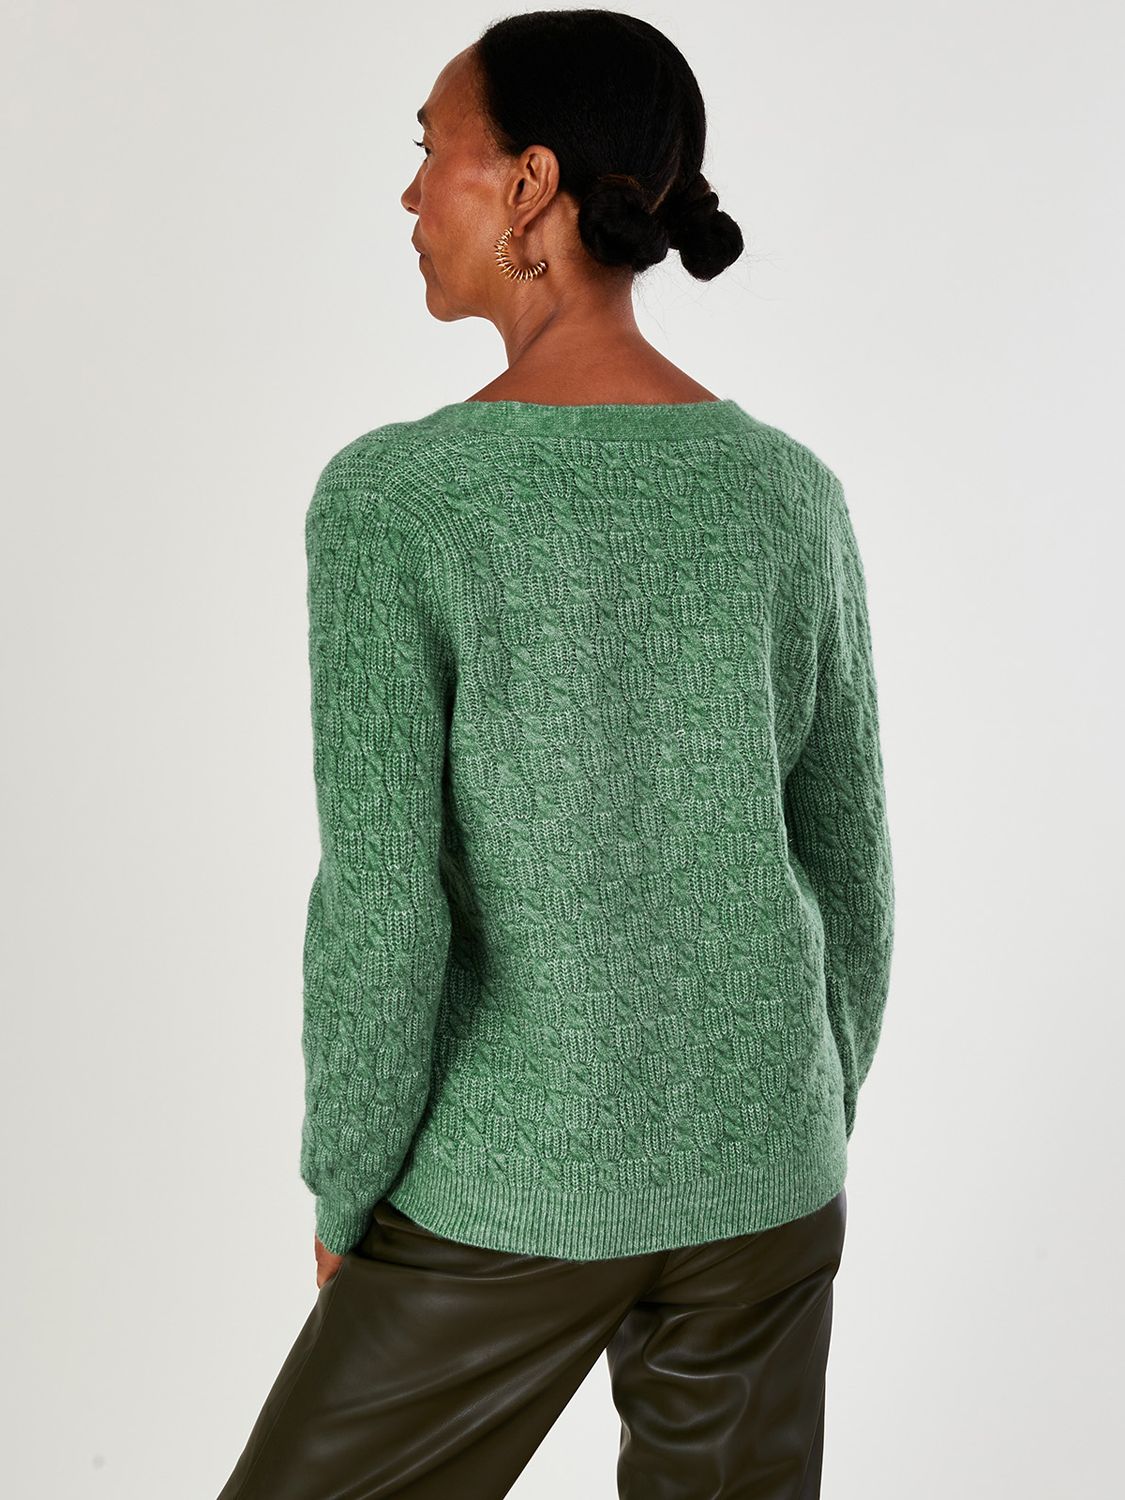 Monsoon Supersoft Cable Knit Cardigan, Green, S